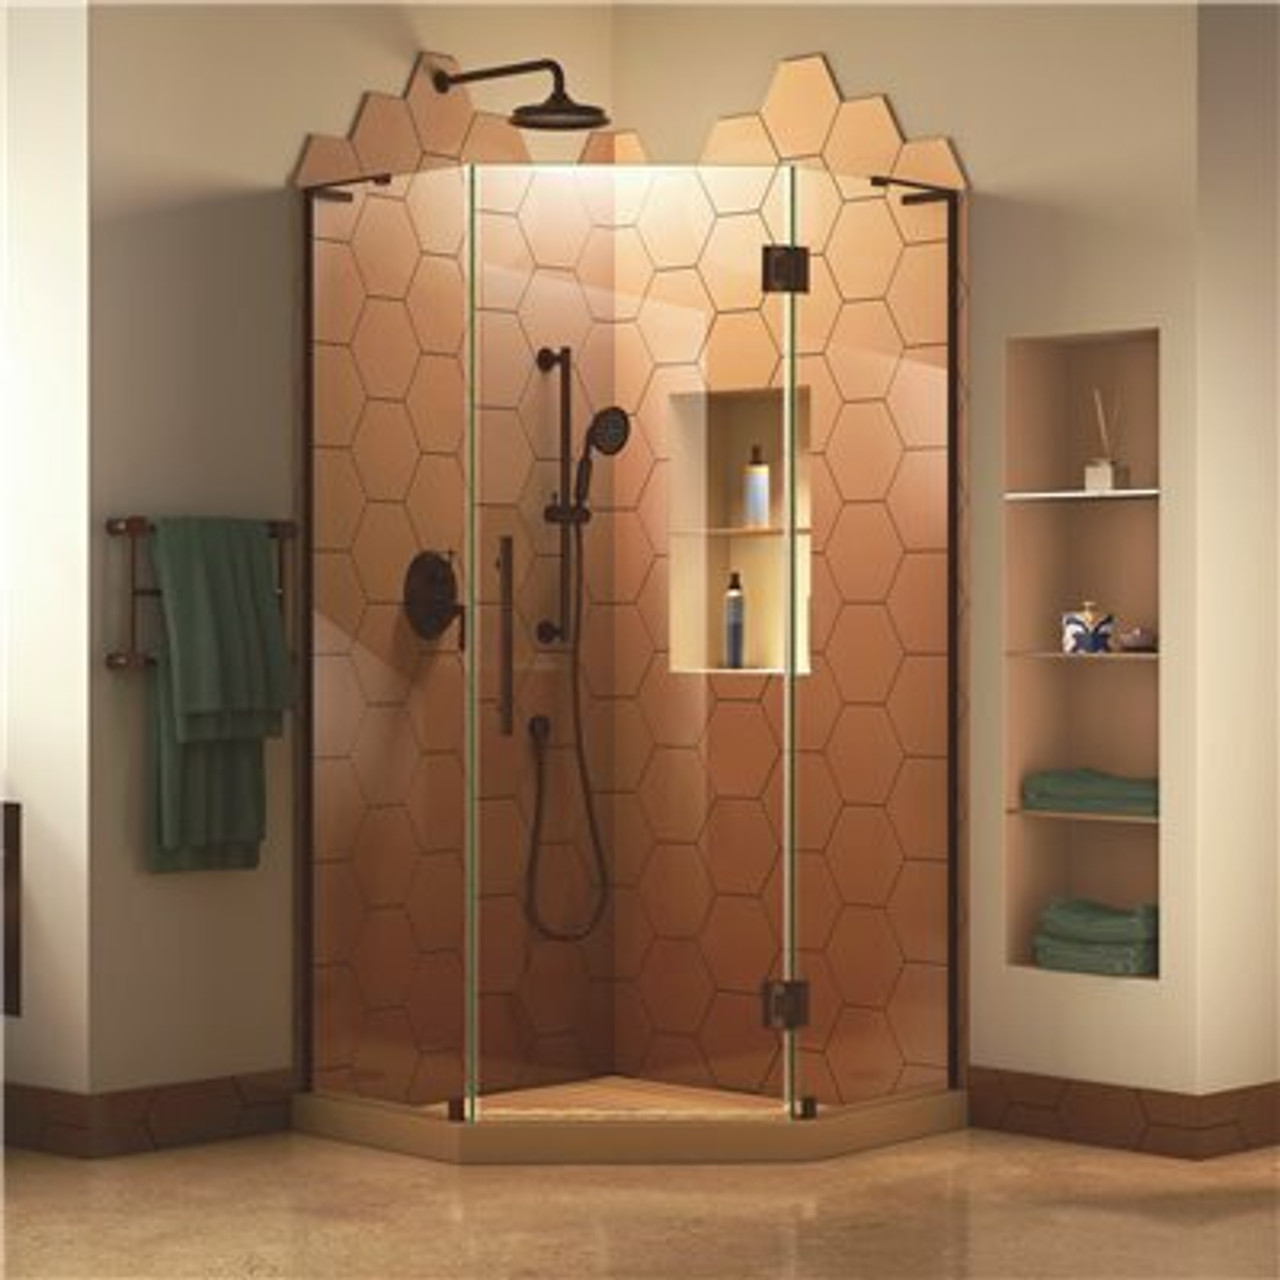 Prism Plus 40 In. D X 40 In. W X 72 In. H Semi-Frameless Neo-Angle Hinged Shower Enclosure In Oil Rubbed Bronze Hardware